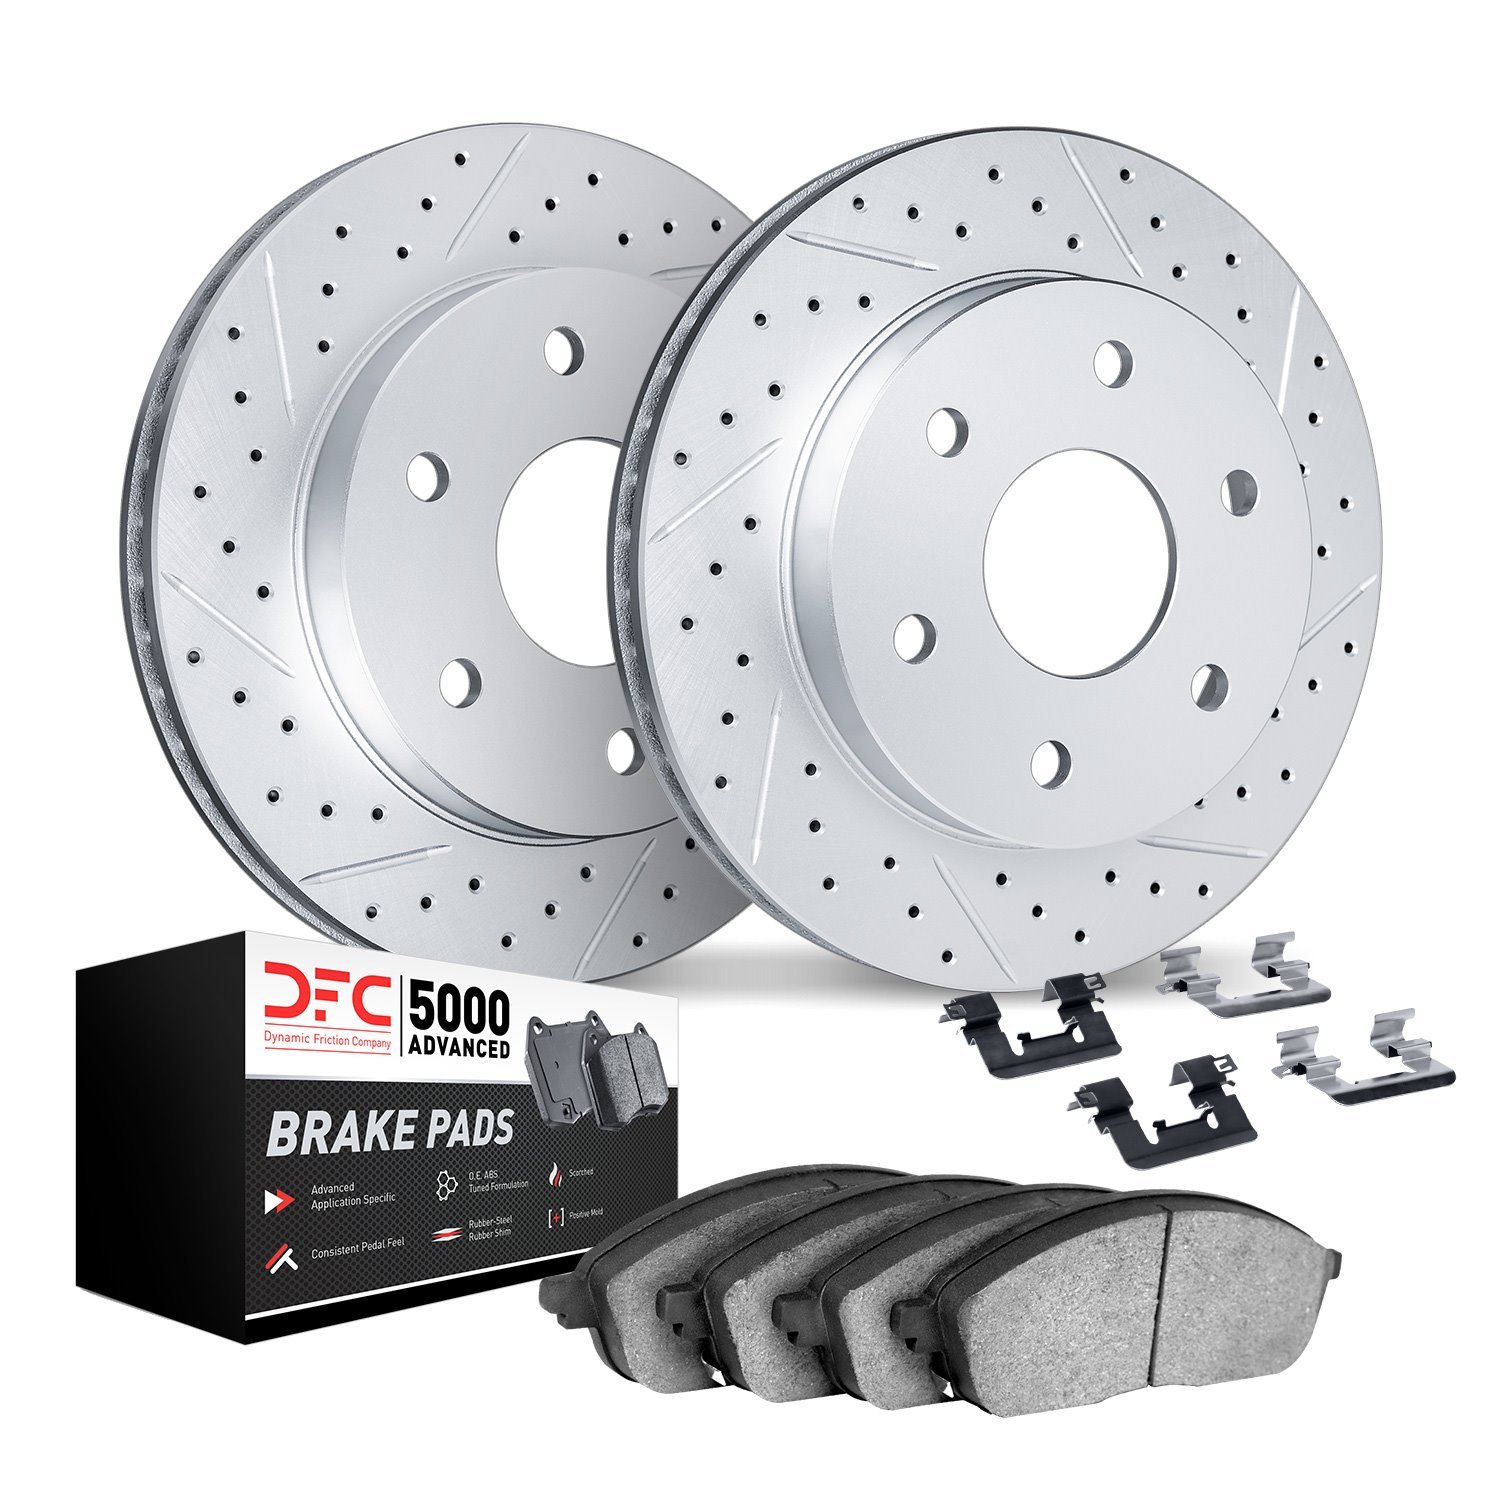 2512-47049 Geoperformance Drilled/Slotted Rotors w/5000 Advanced Brake Pads Kit & Hardware, Fits Select GM, Position: Rear